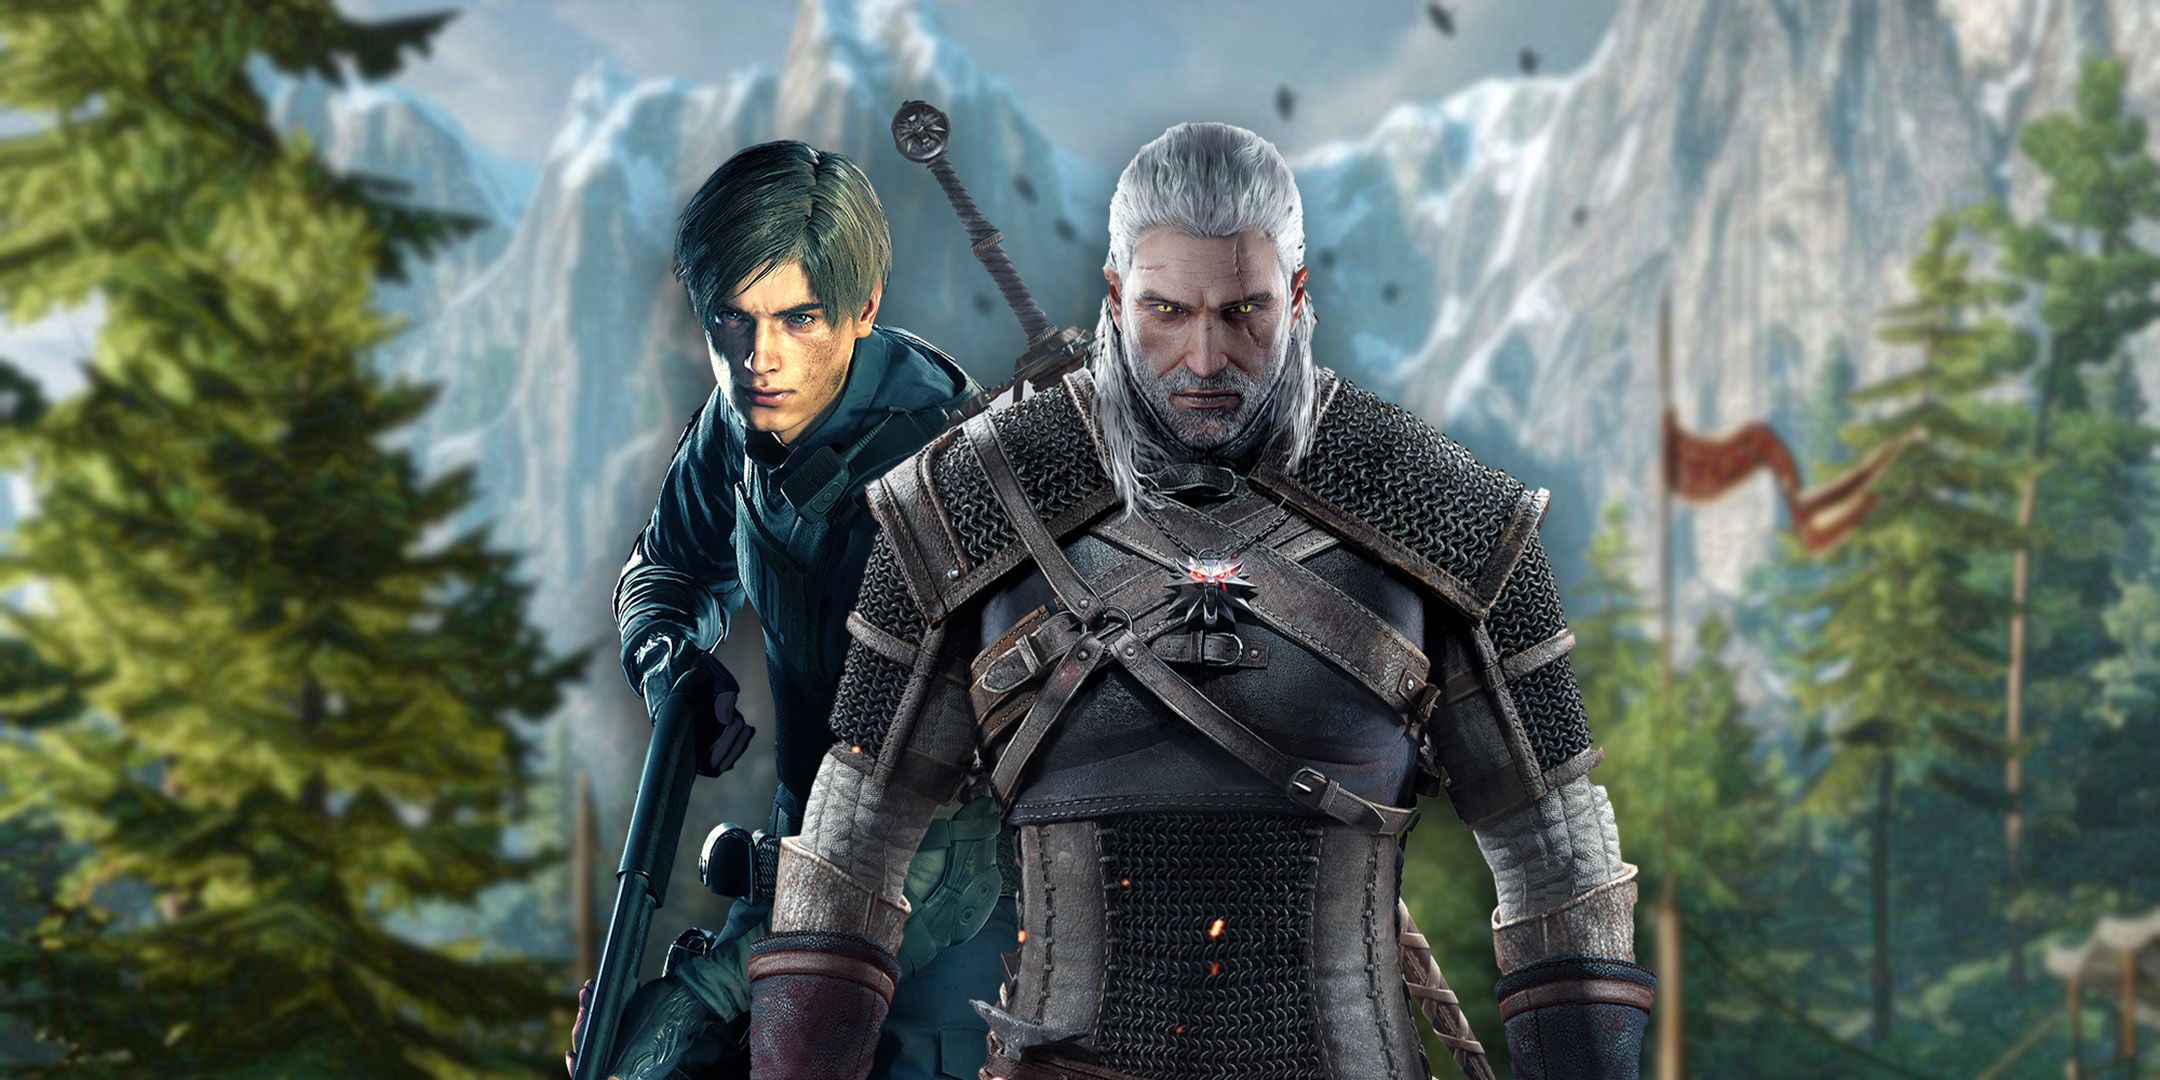 Geralt and Leon Kennedy in a forest from the Witcher